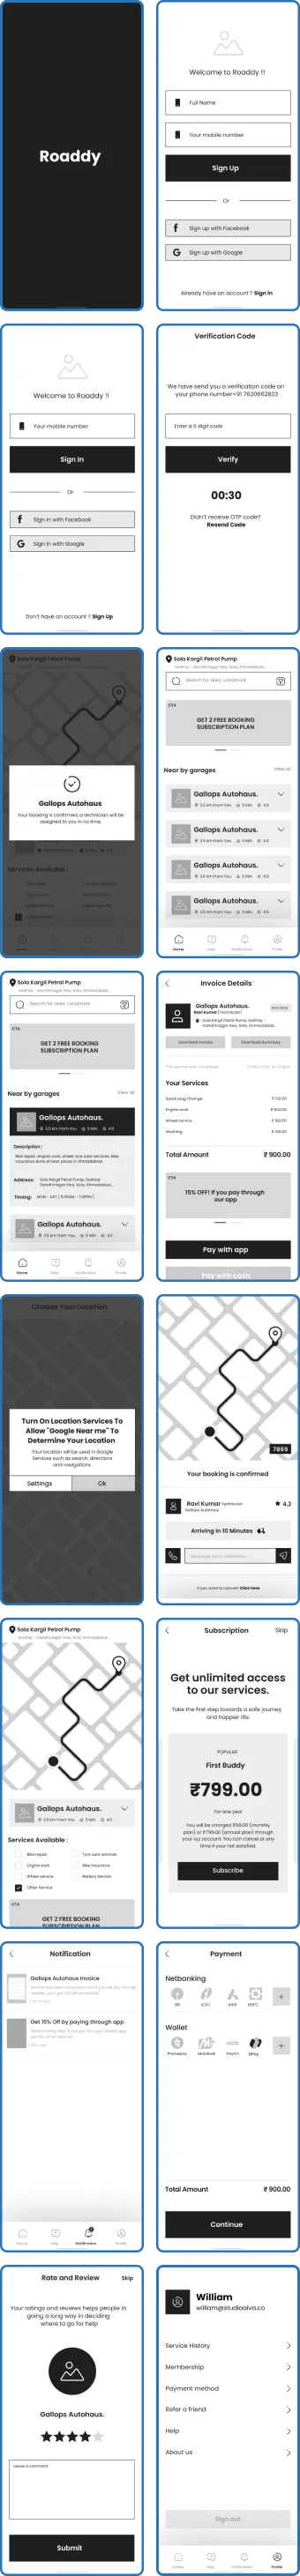 High-Fidelity Wireframe showing different app screens of roadside service app